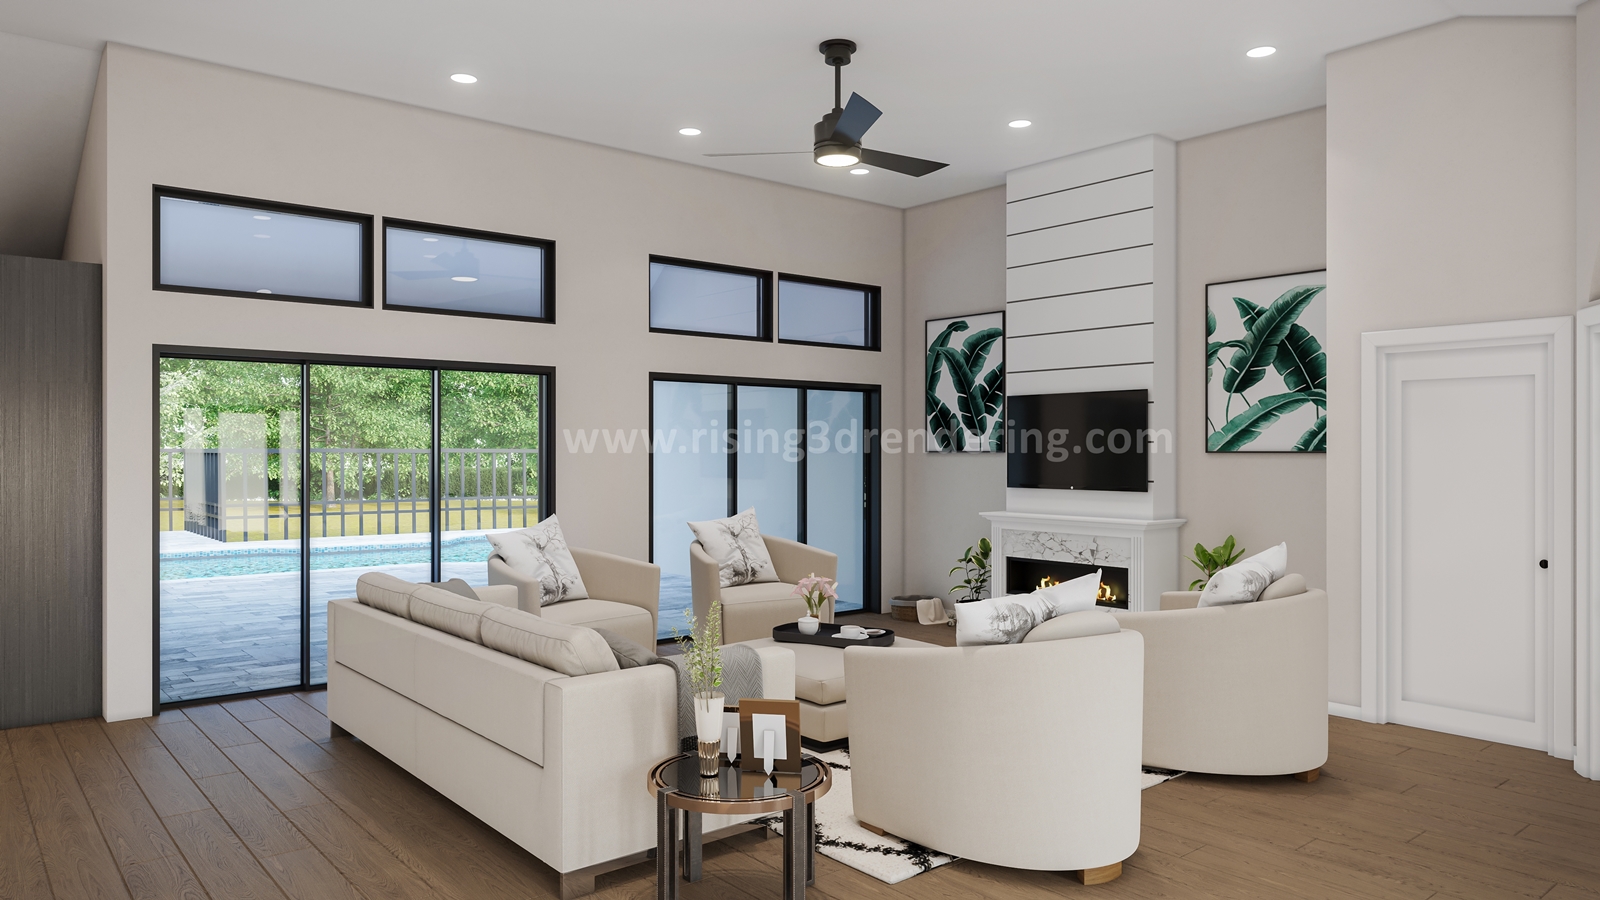 Budget-Friendly Interior and Exterior Design Rendering with Rising 3D